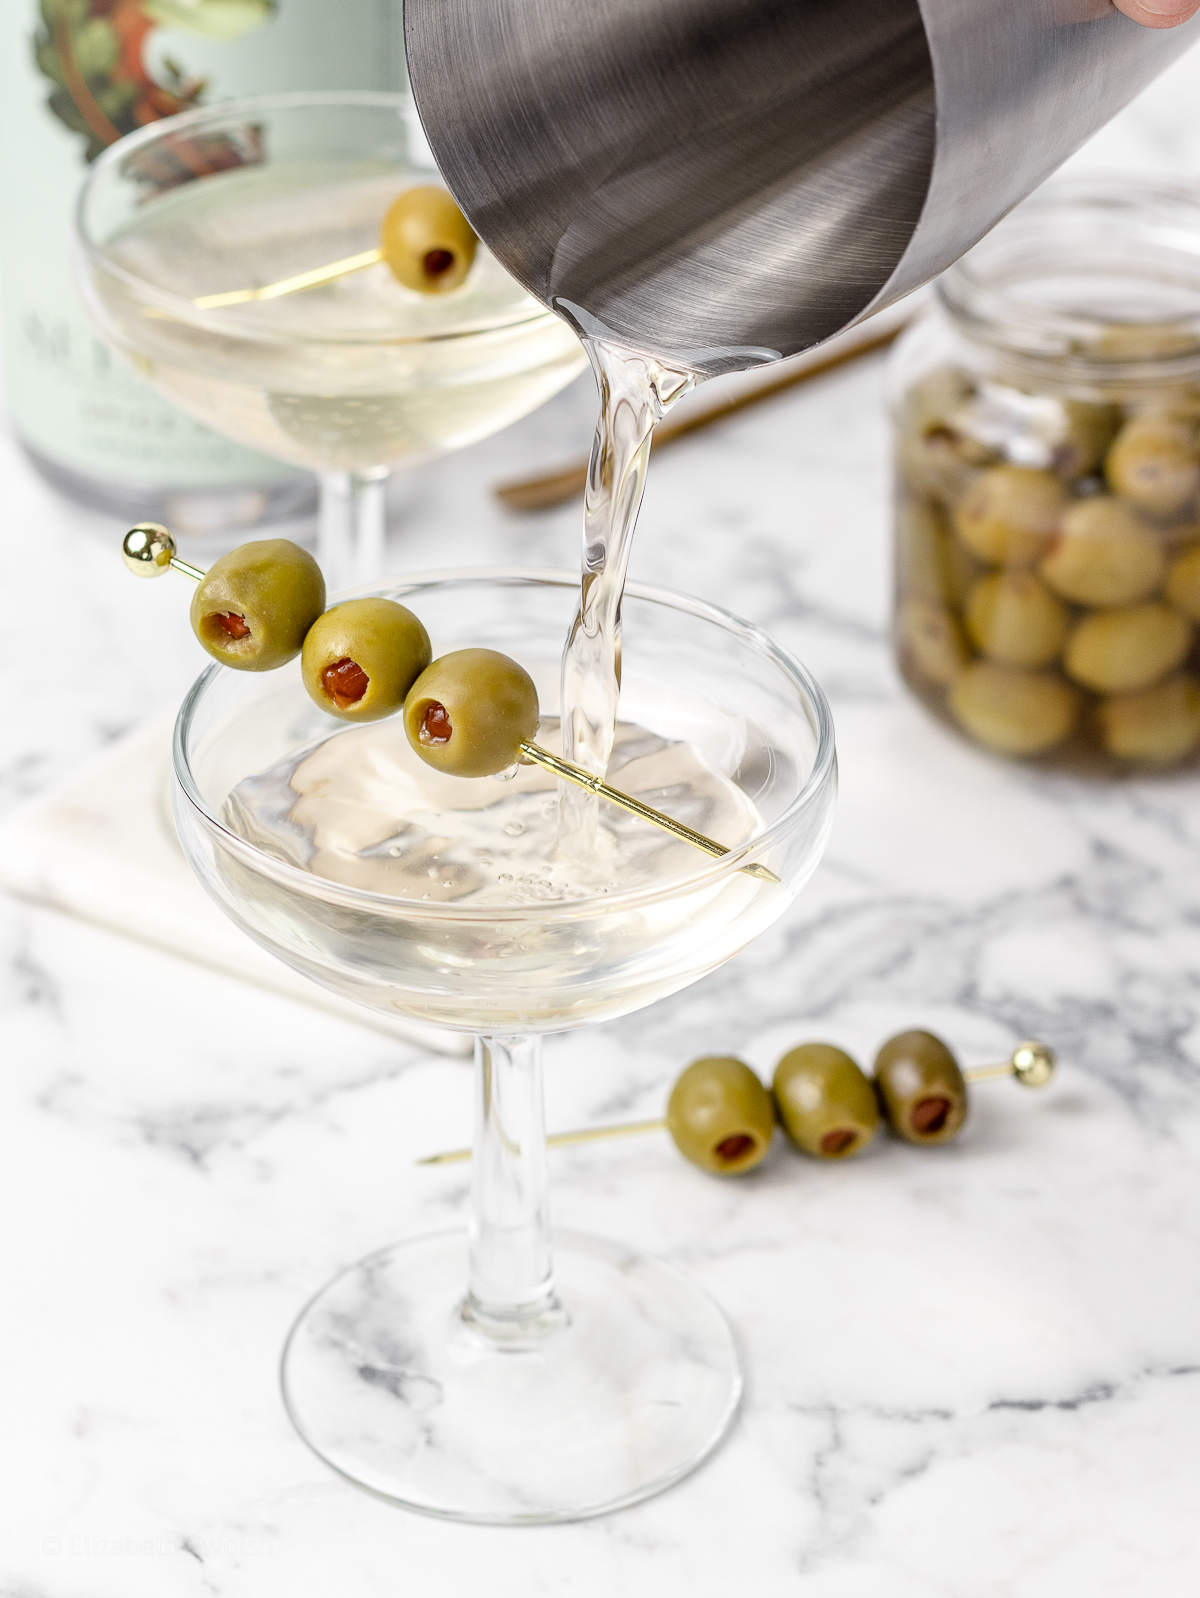 Pouring into a glass garnished with 3 olives and more olives on the side.